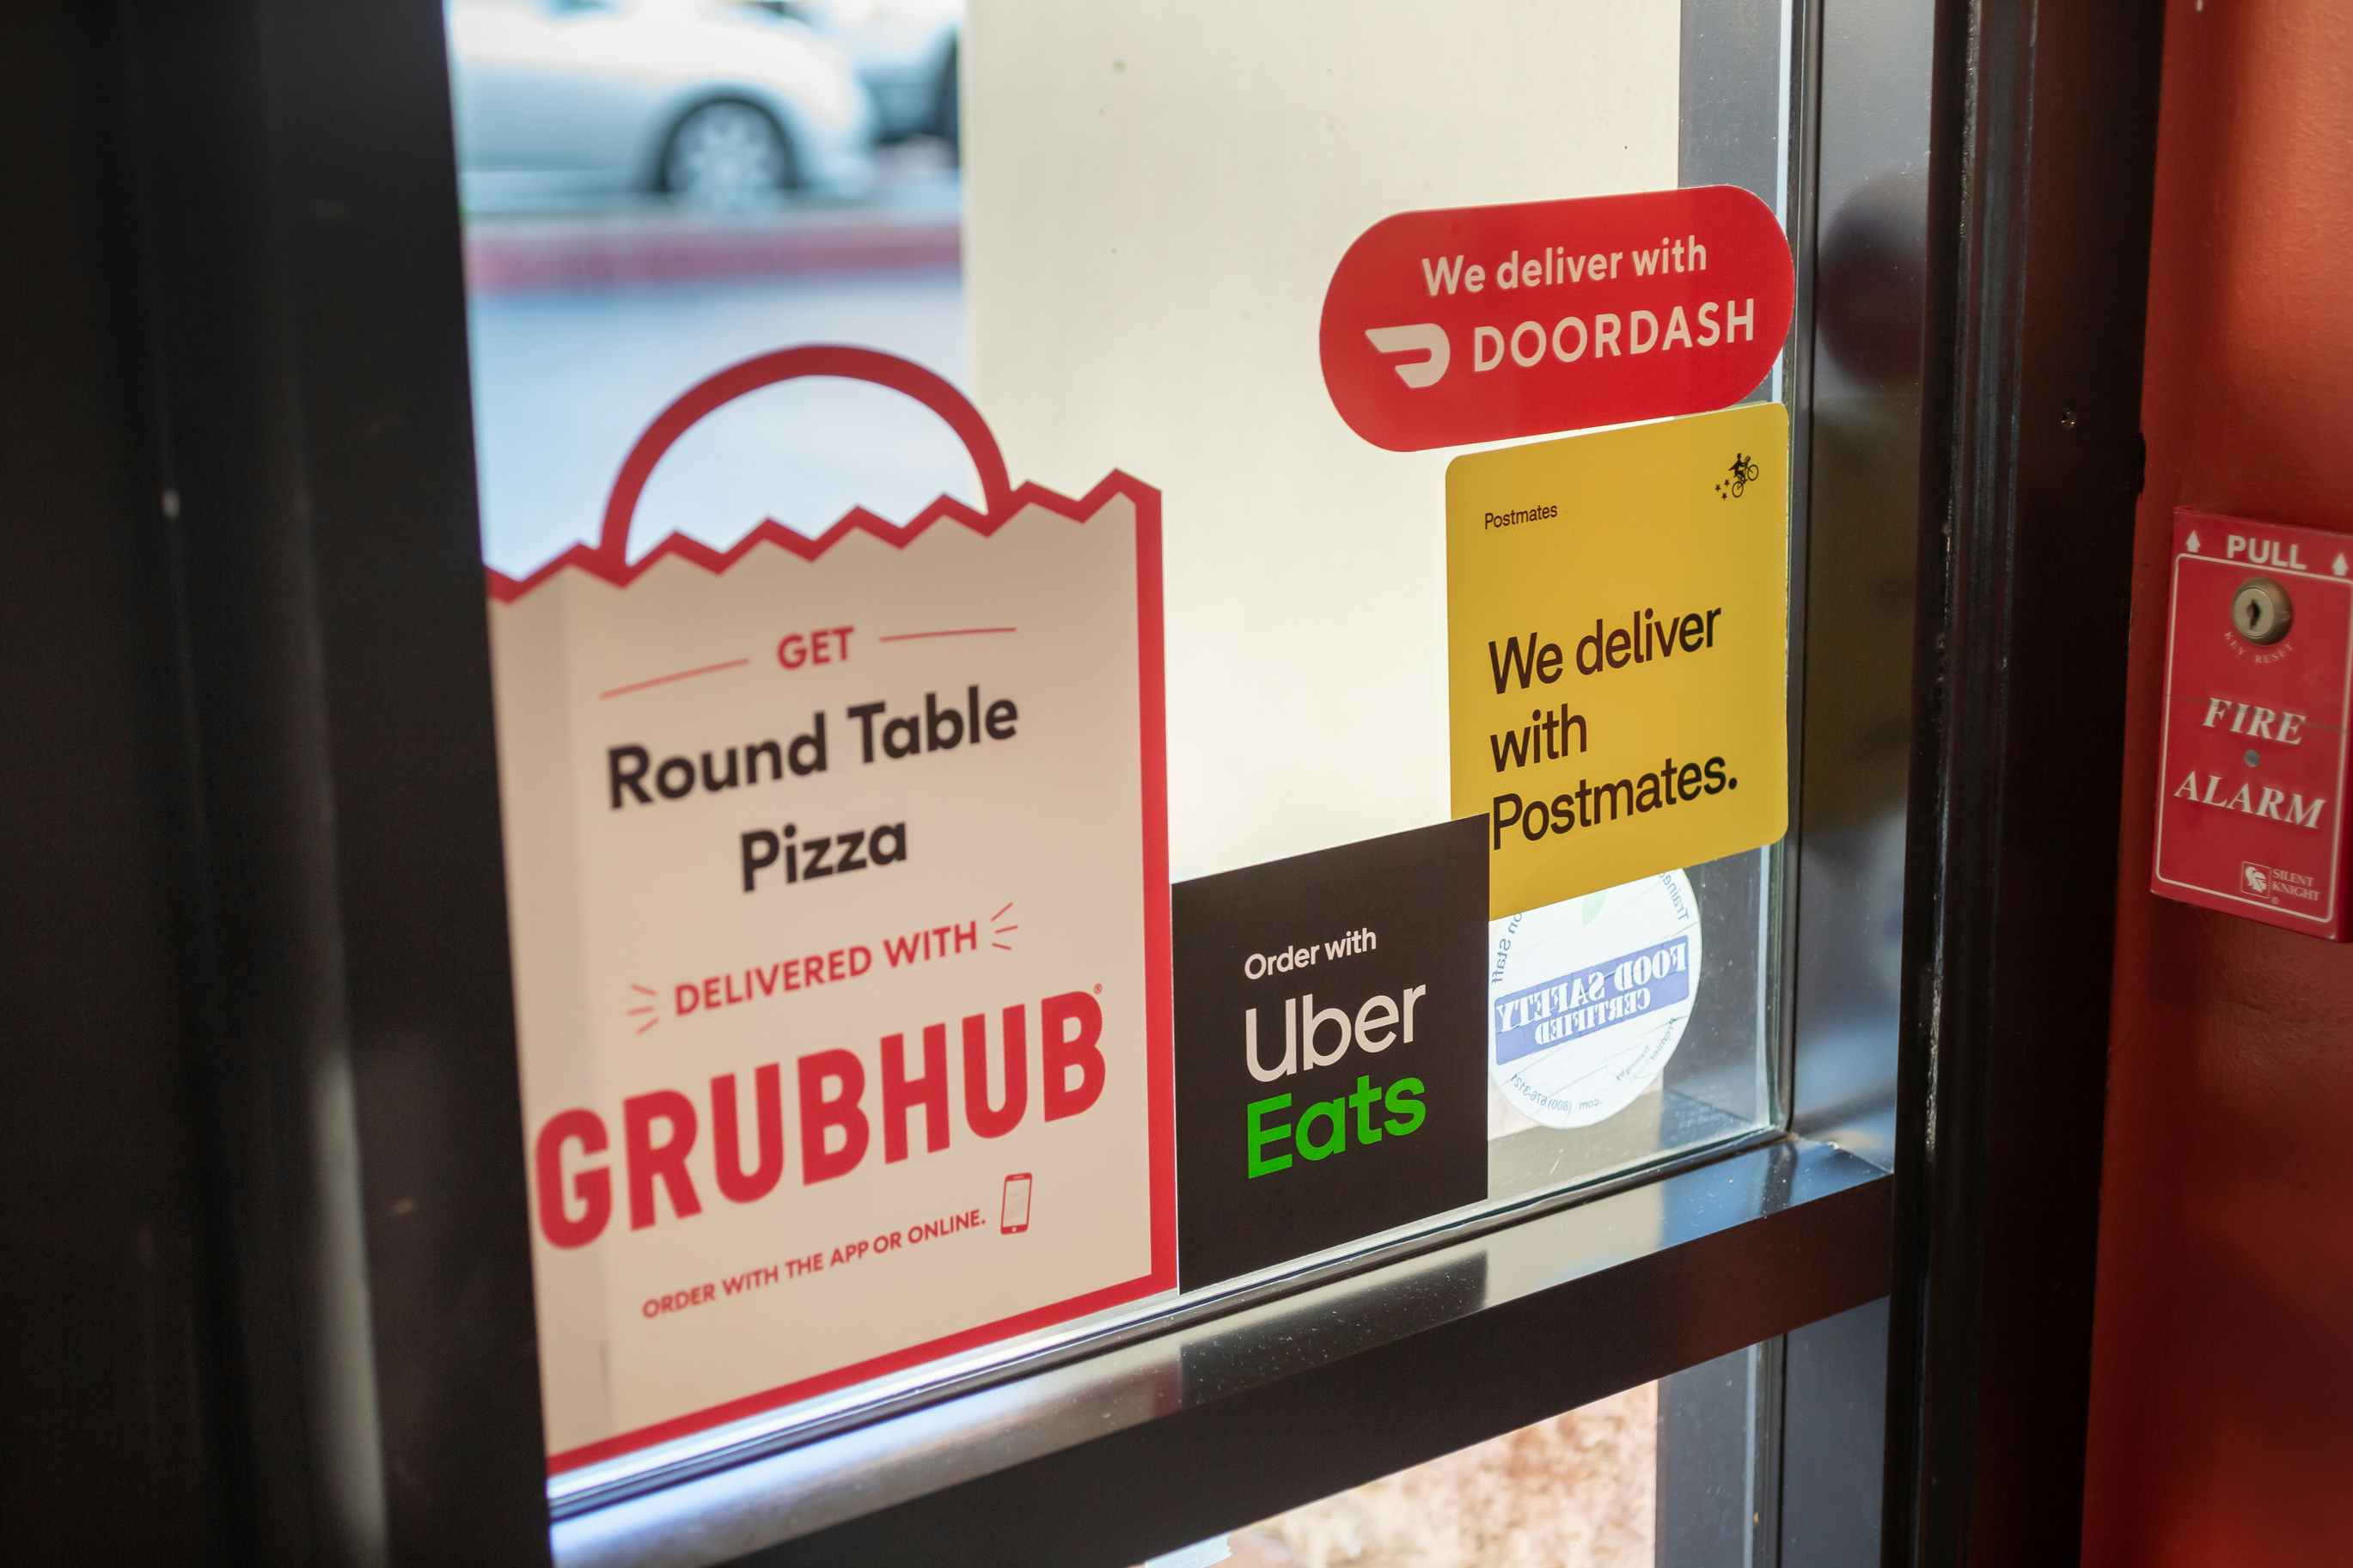 - A restaurant window displaying stickers for various food delivery services, including Grubhub, Uber Eats, Postmates, and Doordash.